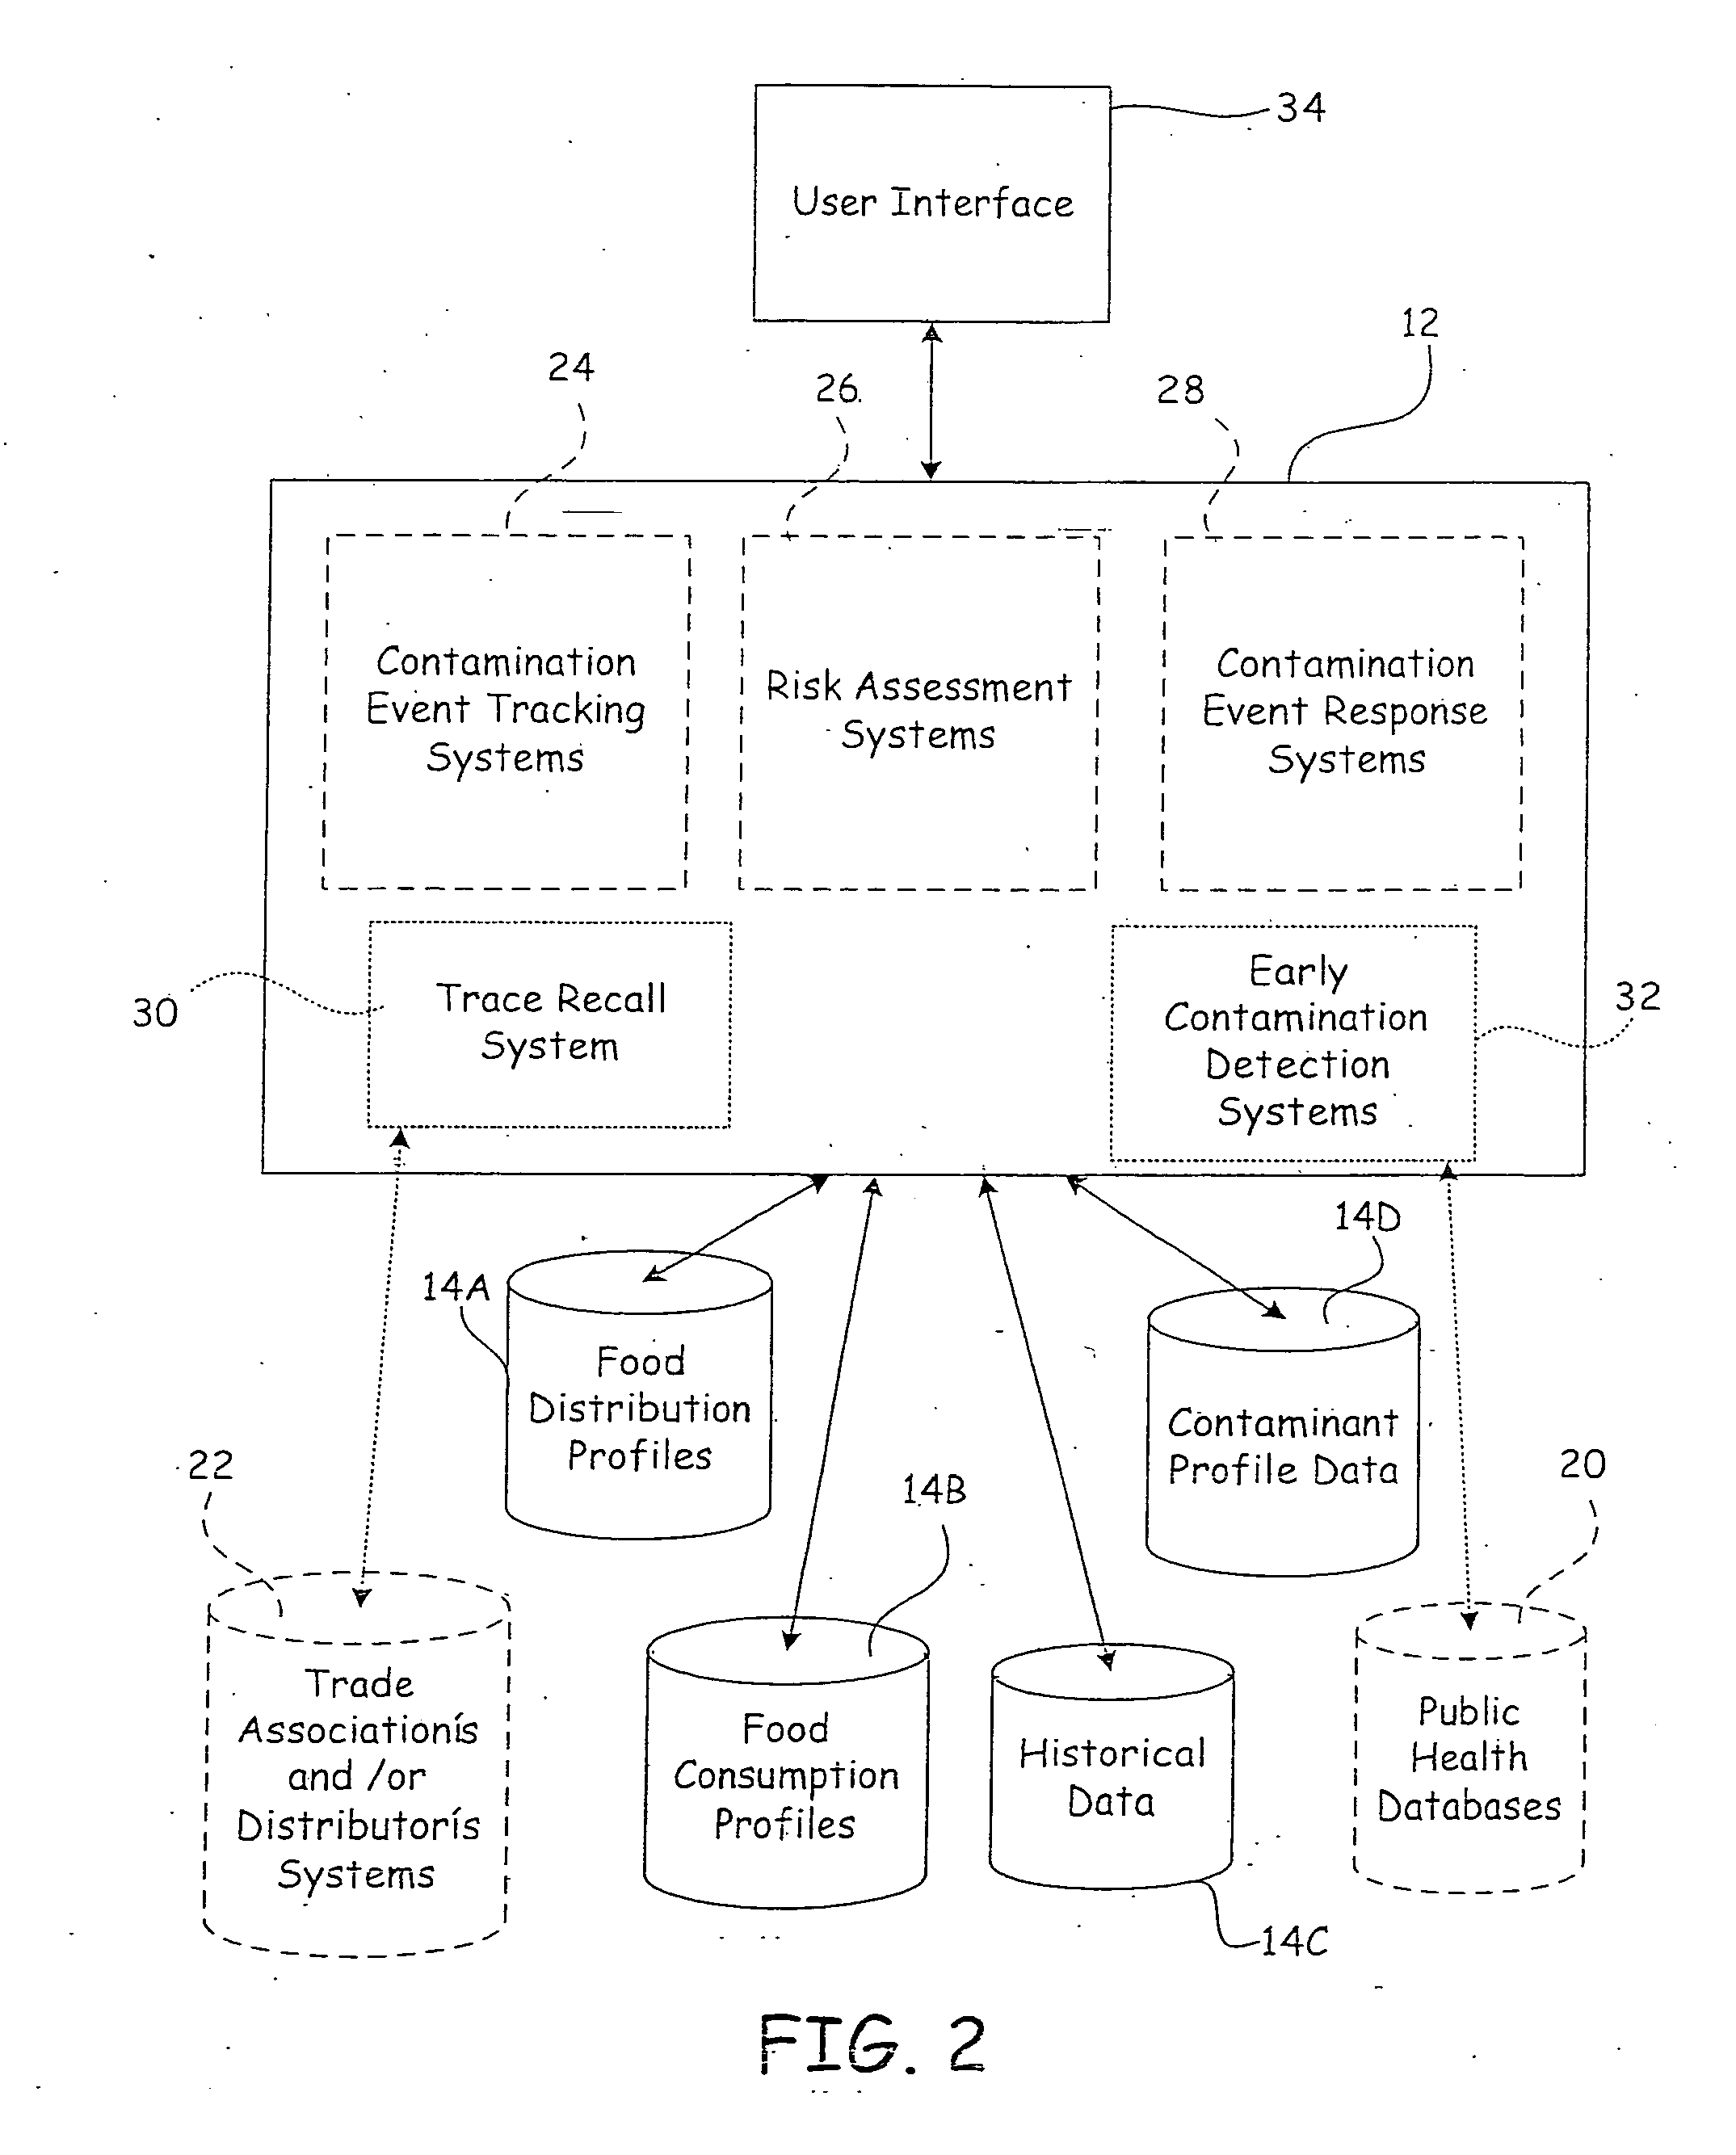 System and method for identifying a food event, tracking the food product, and assessing risks and costs associated with intervention